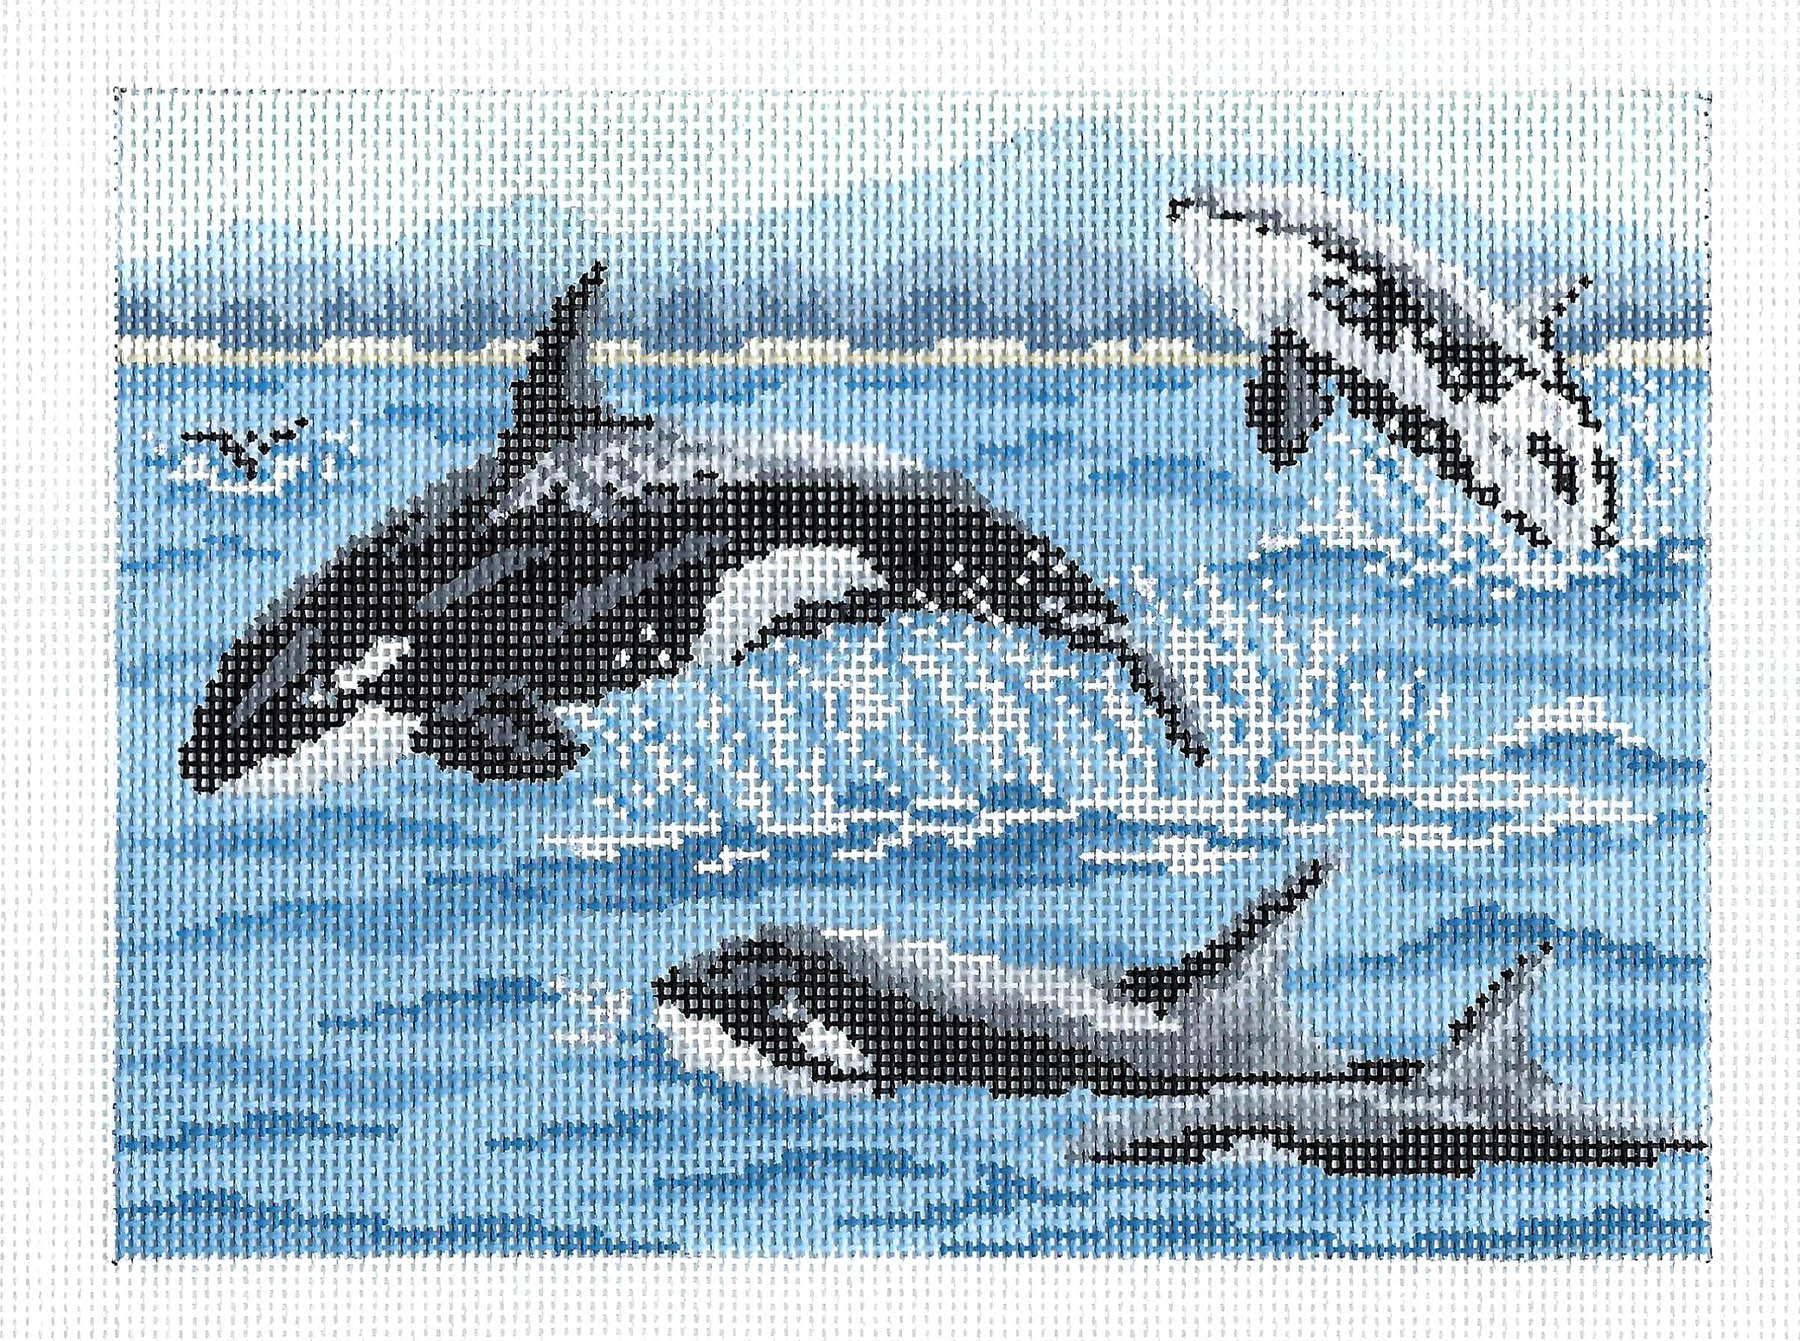 Orca Killer Whales Pod handpainted 18 Mesh Needlepoint Canvas by Needle  Crossings